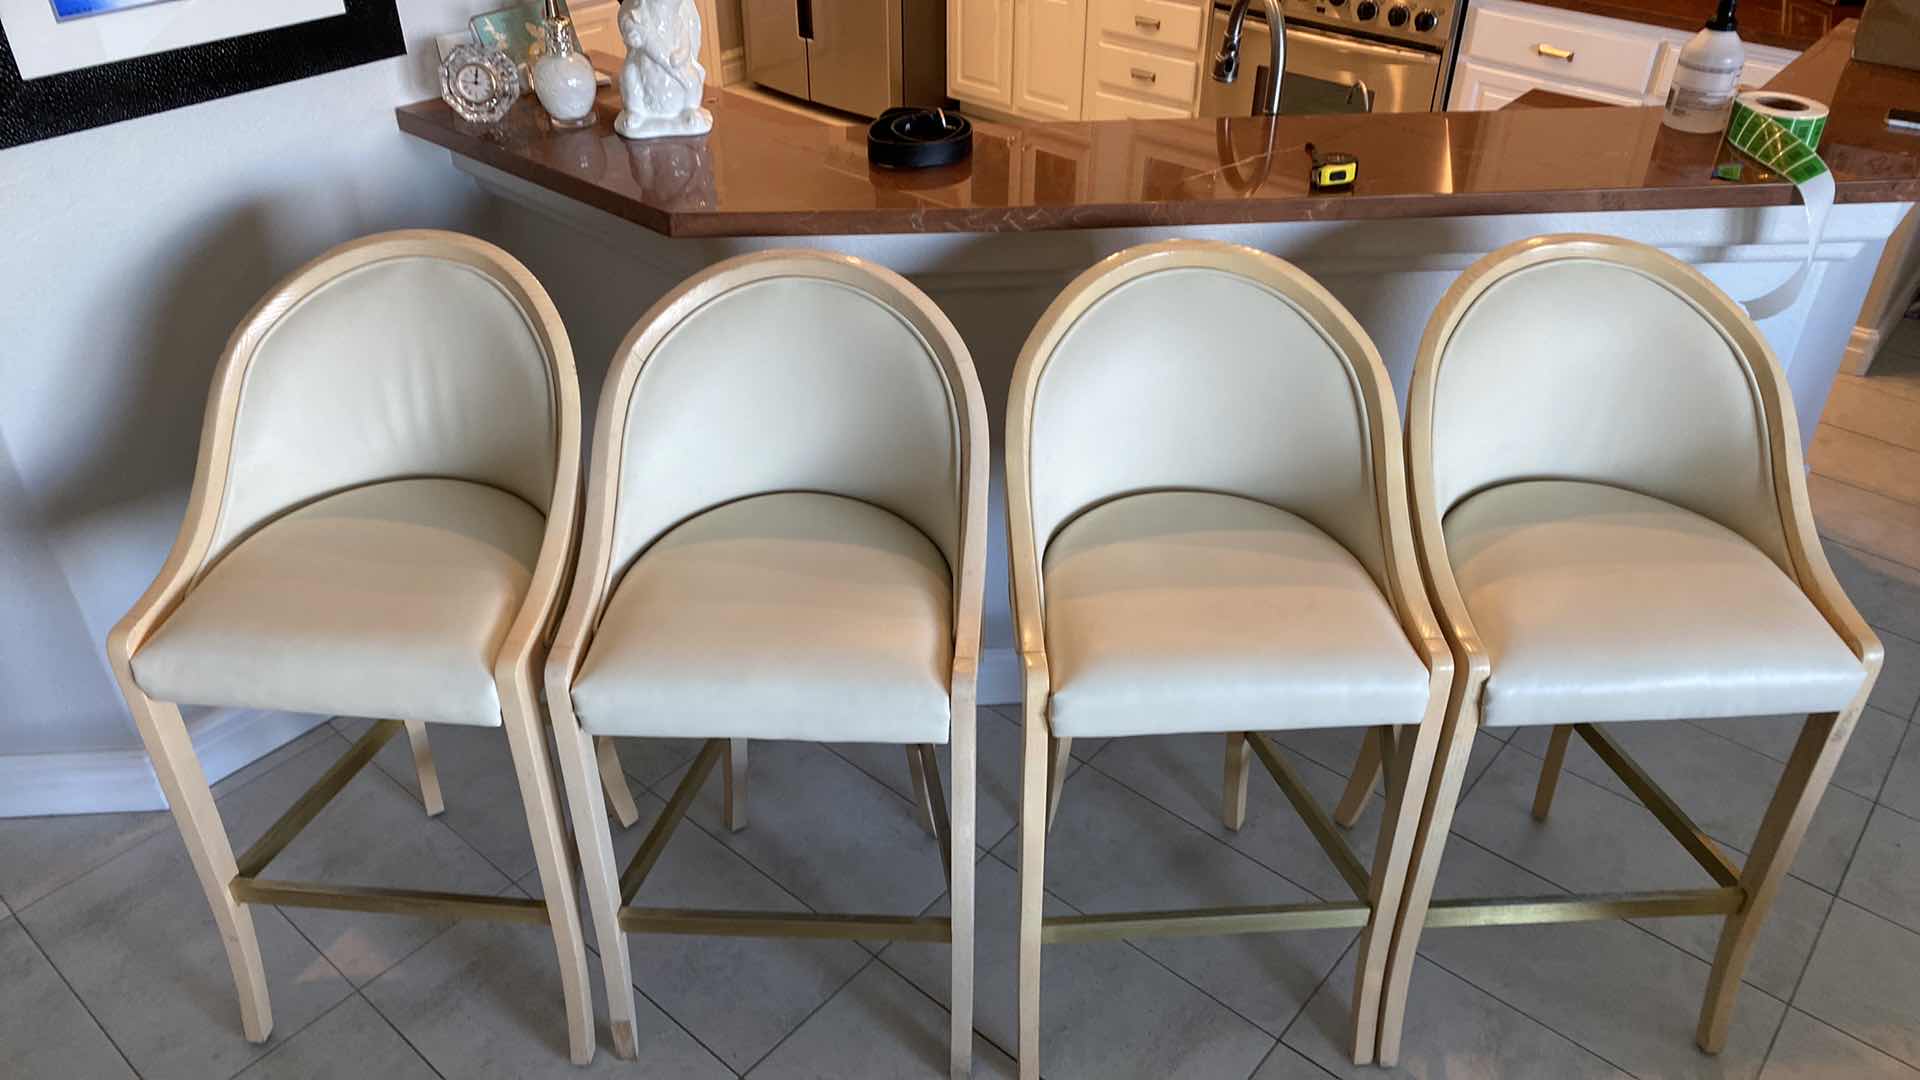 Photo 2 of 4 - CREAM COLOR LEATHER WITH LIGHT WOOD BAR STOOLS FROM THE WYNN - SEAT HEIGHT 31.5”